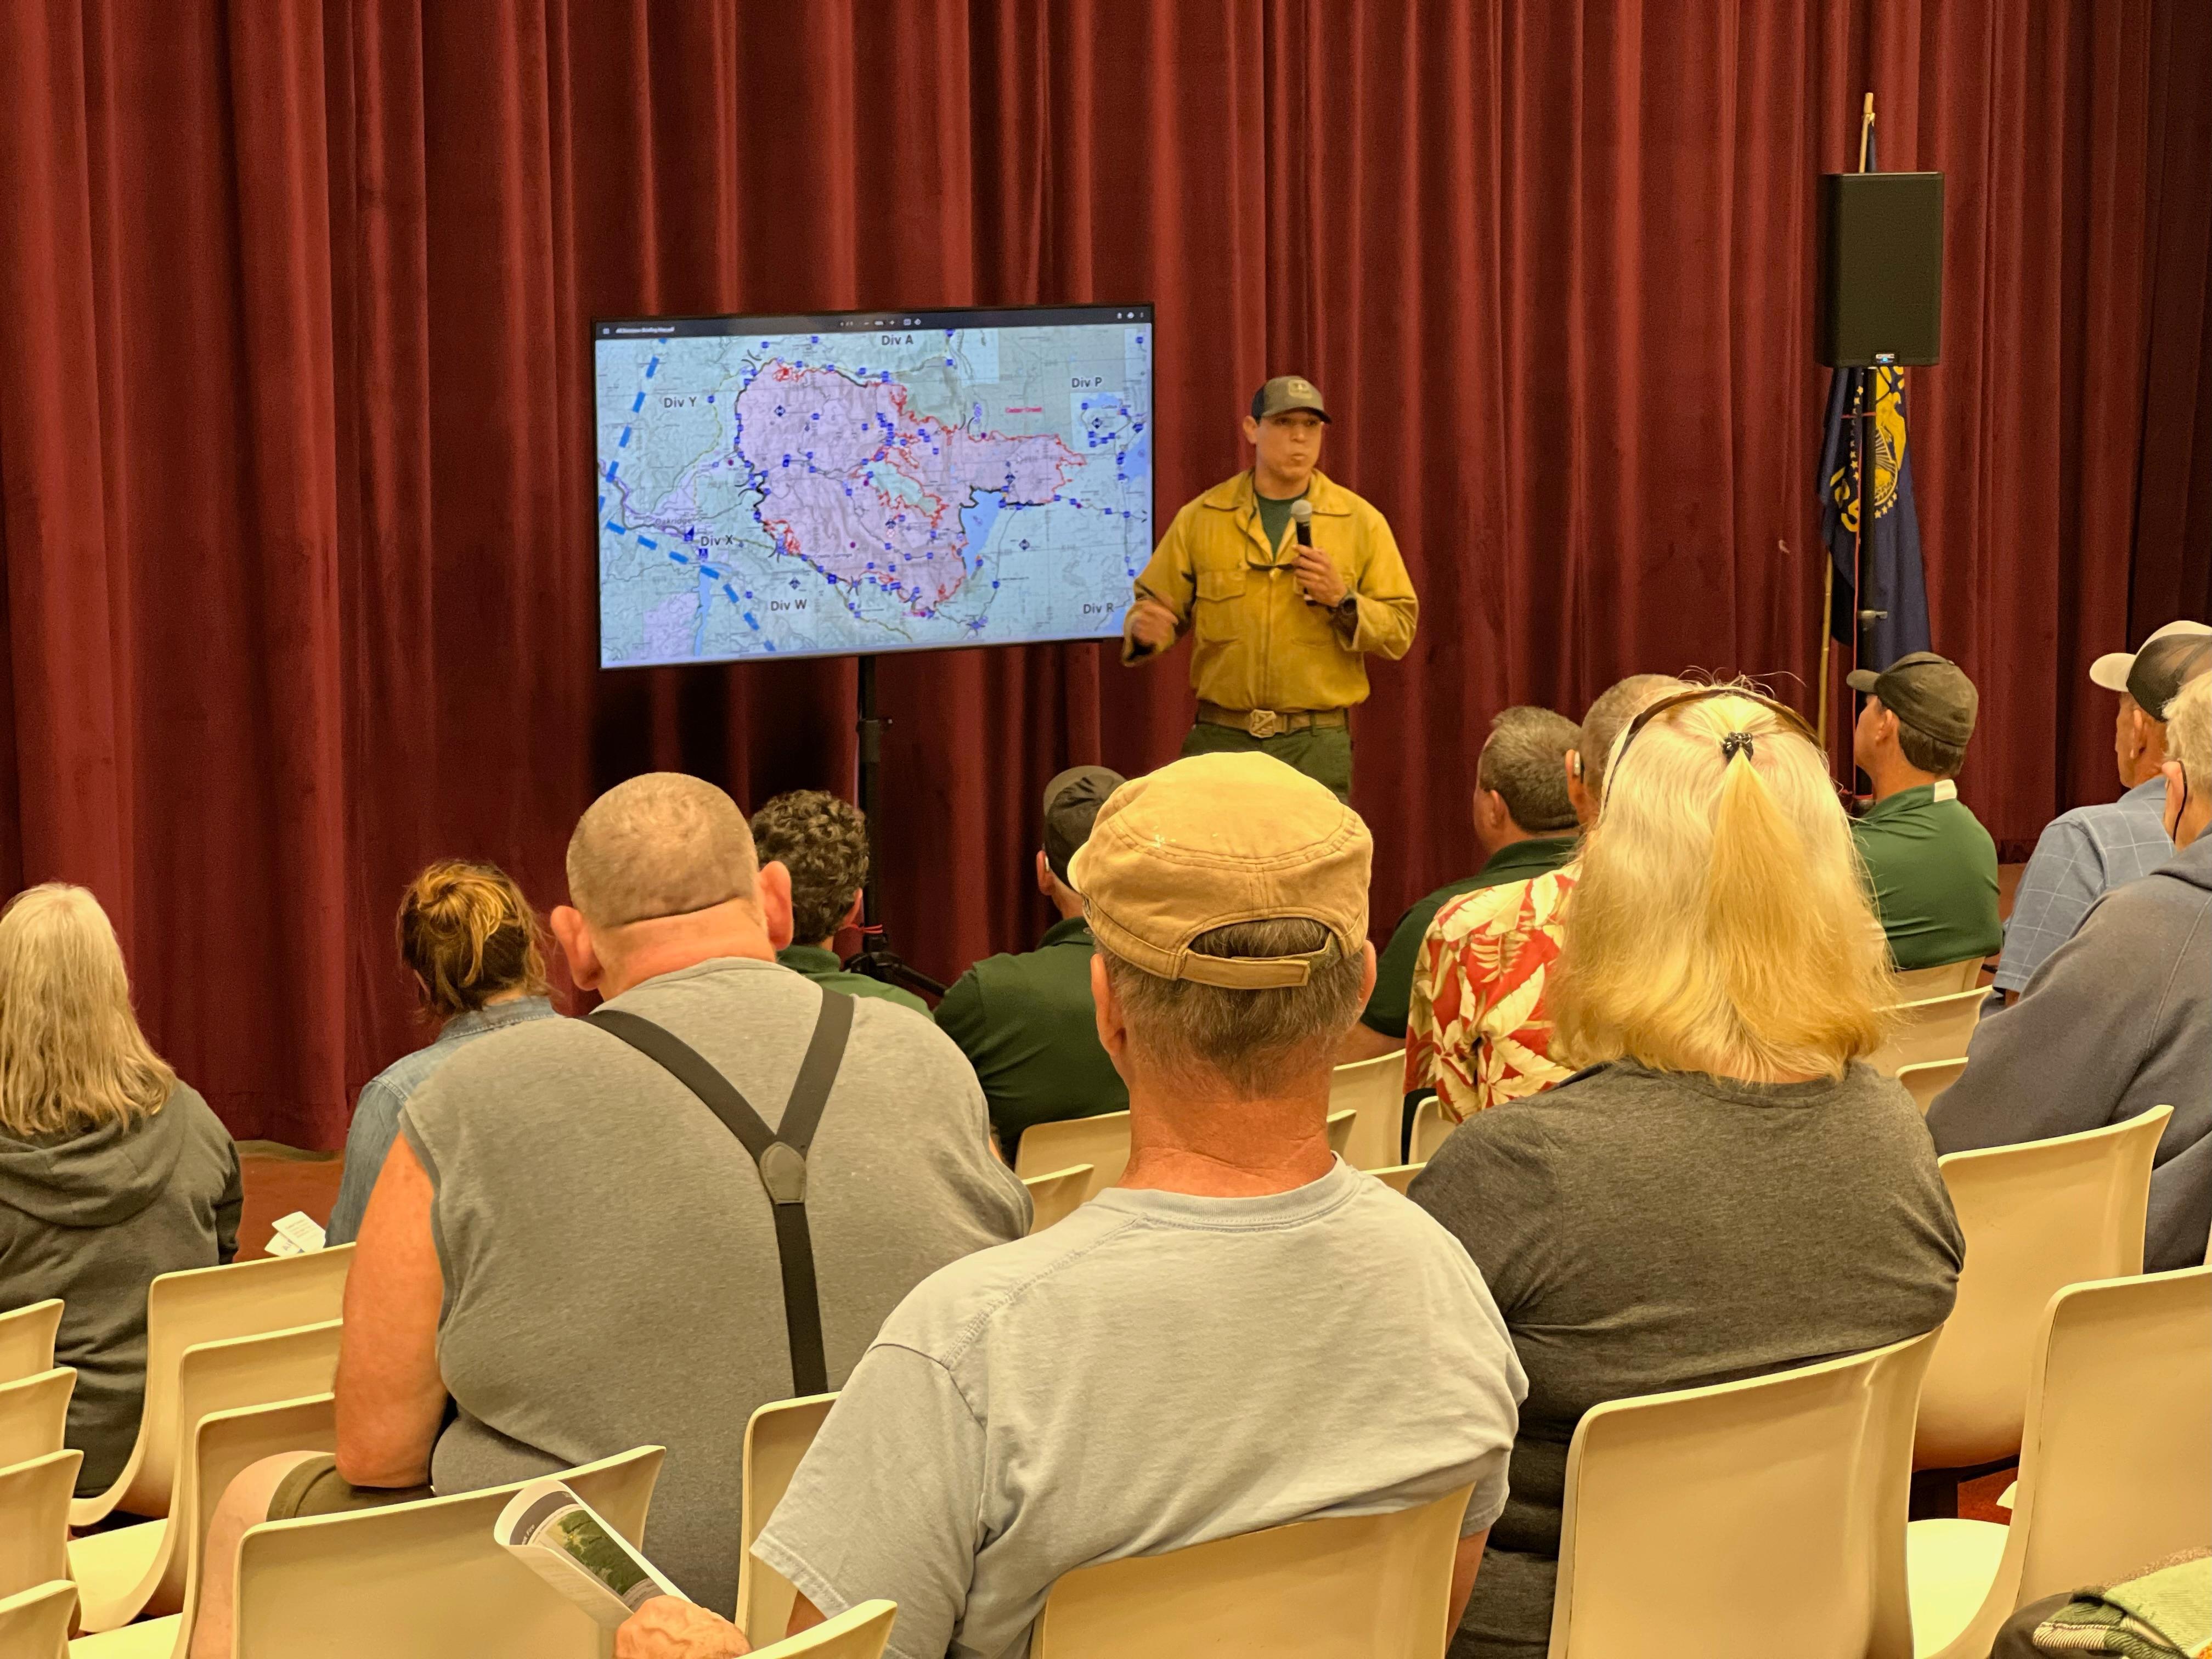 People sit in chairs looking at a man in a yellow shirt who is presenting fire information next to a tv screen.